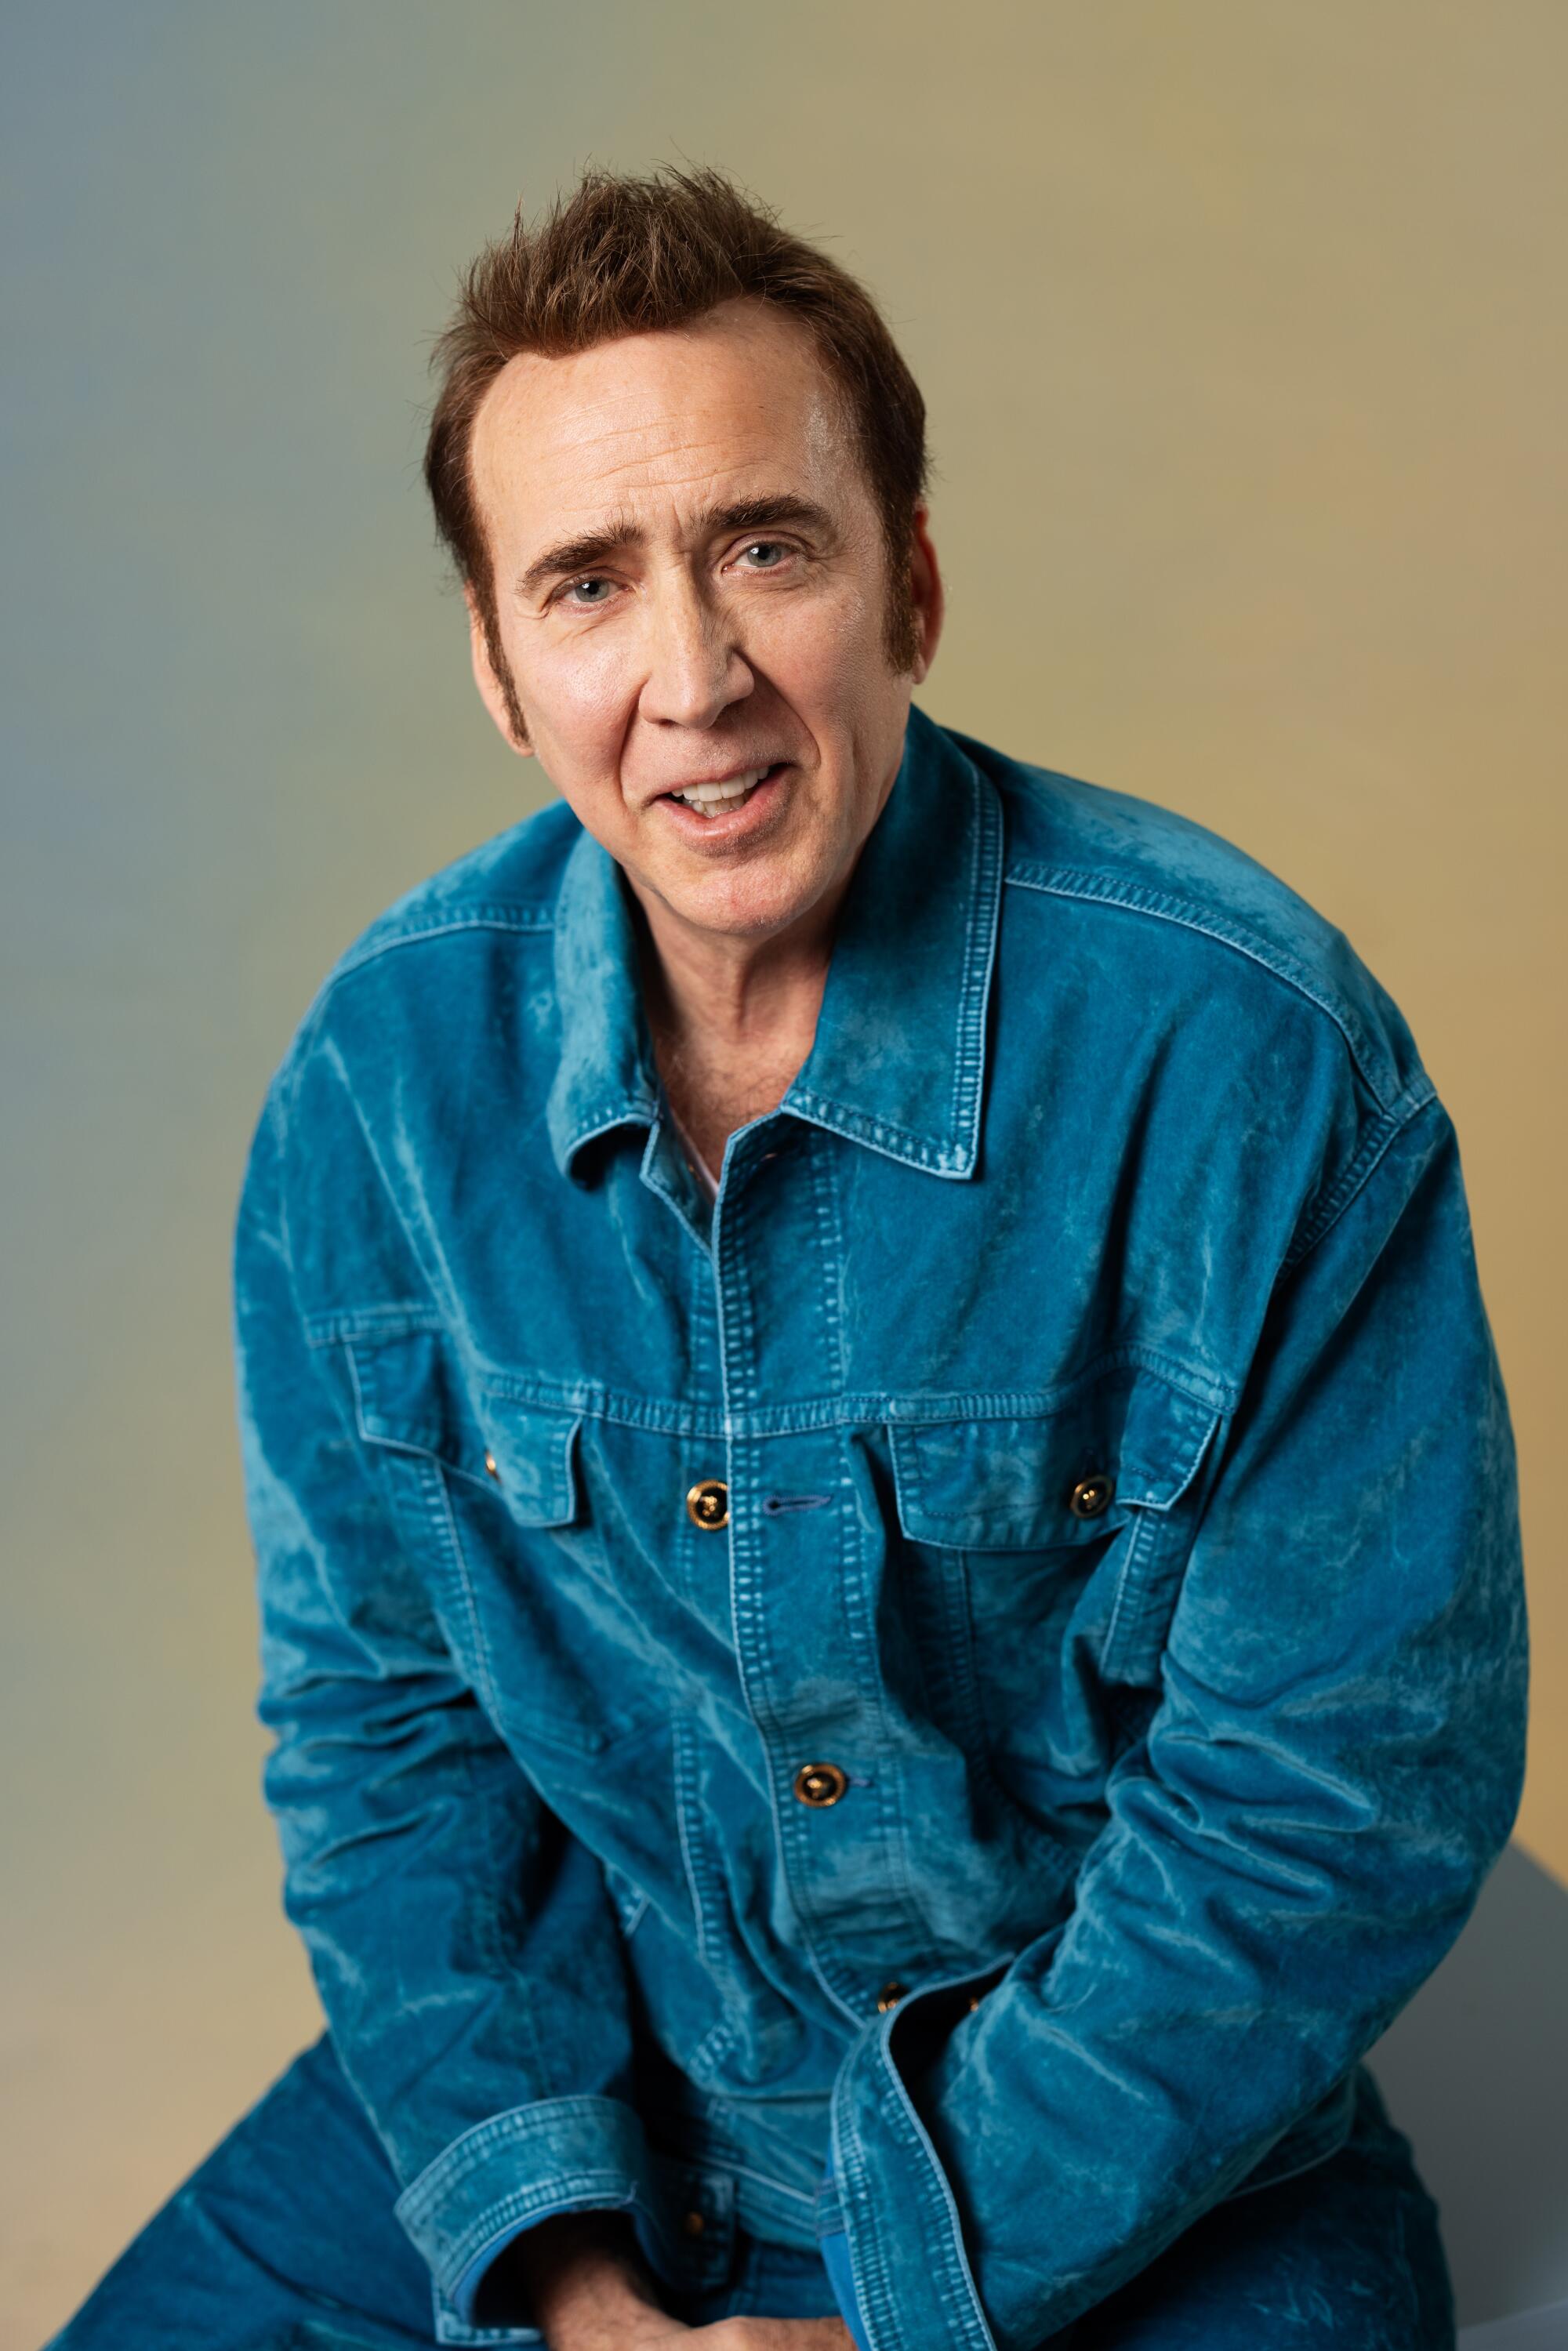 Nicolas Cage sits wearing a blue shirt and smiles.